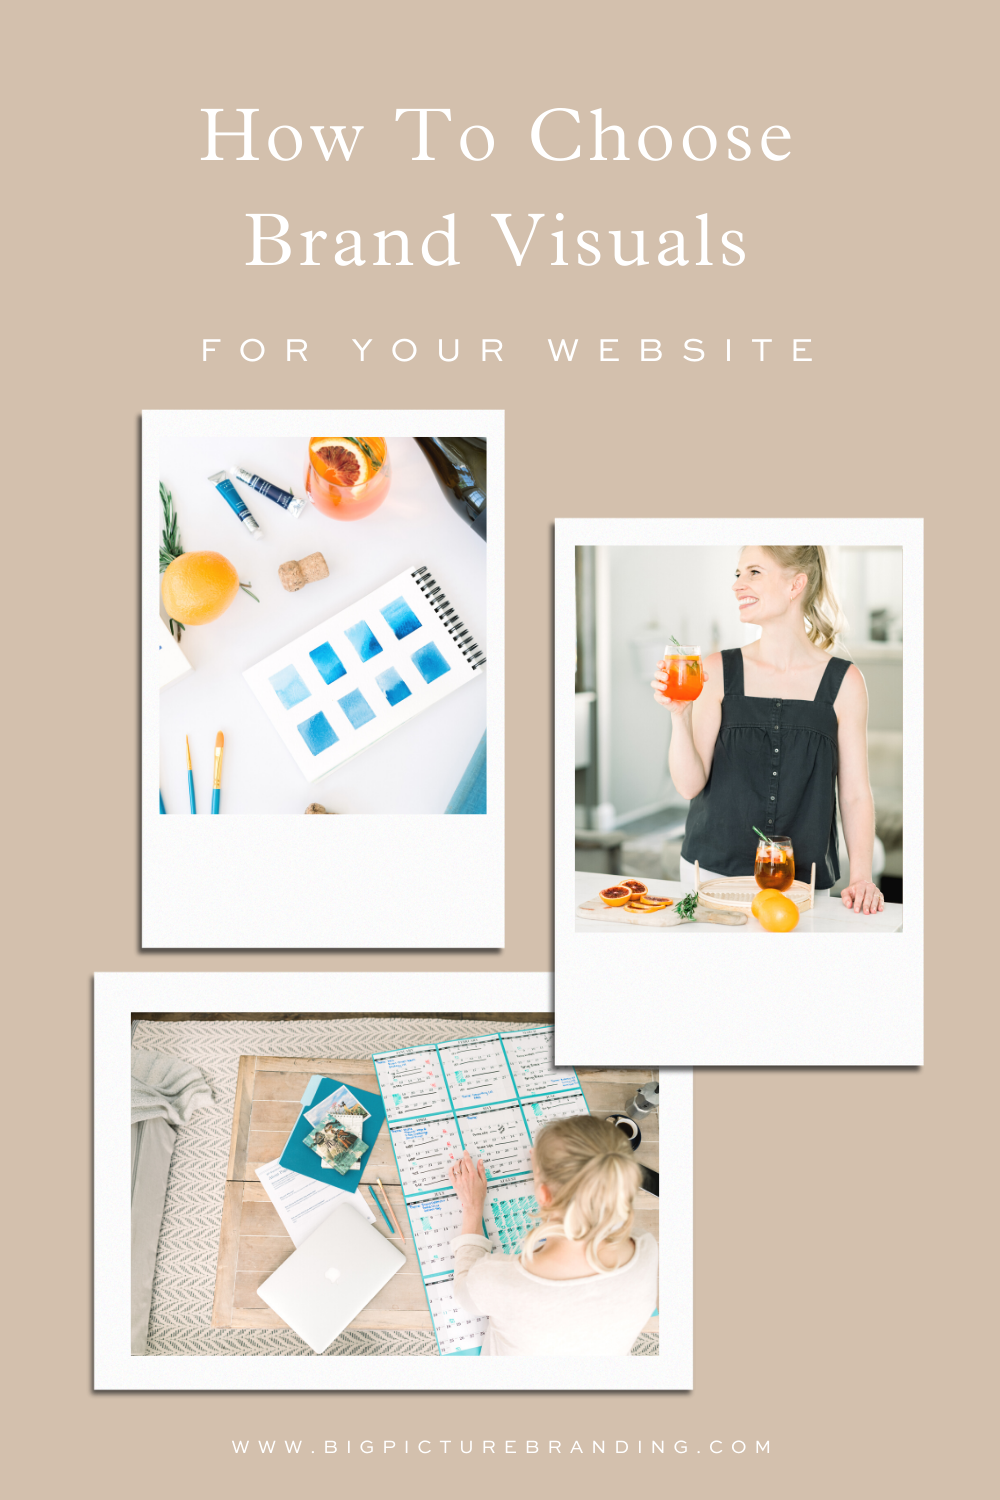 how to choose brand visuals for your business website